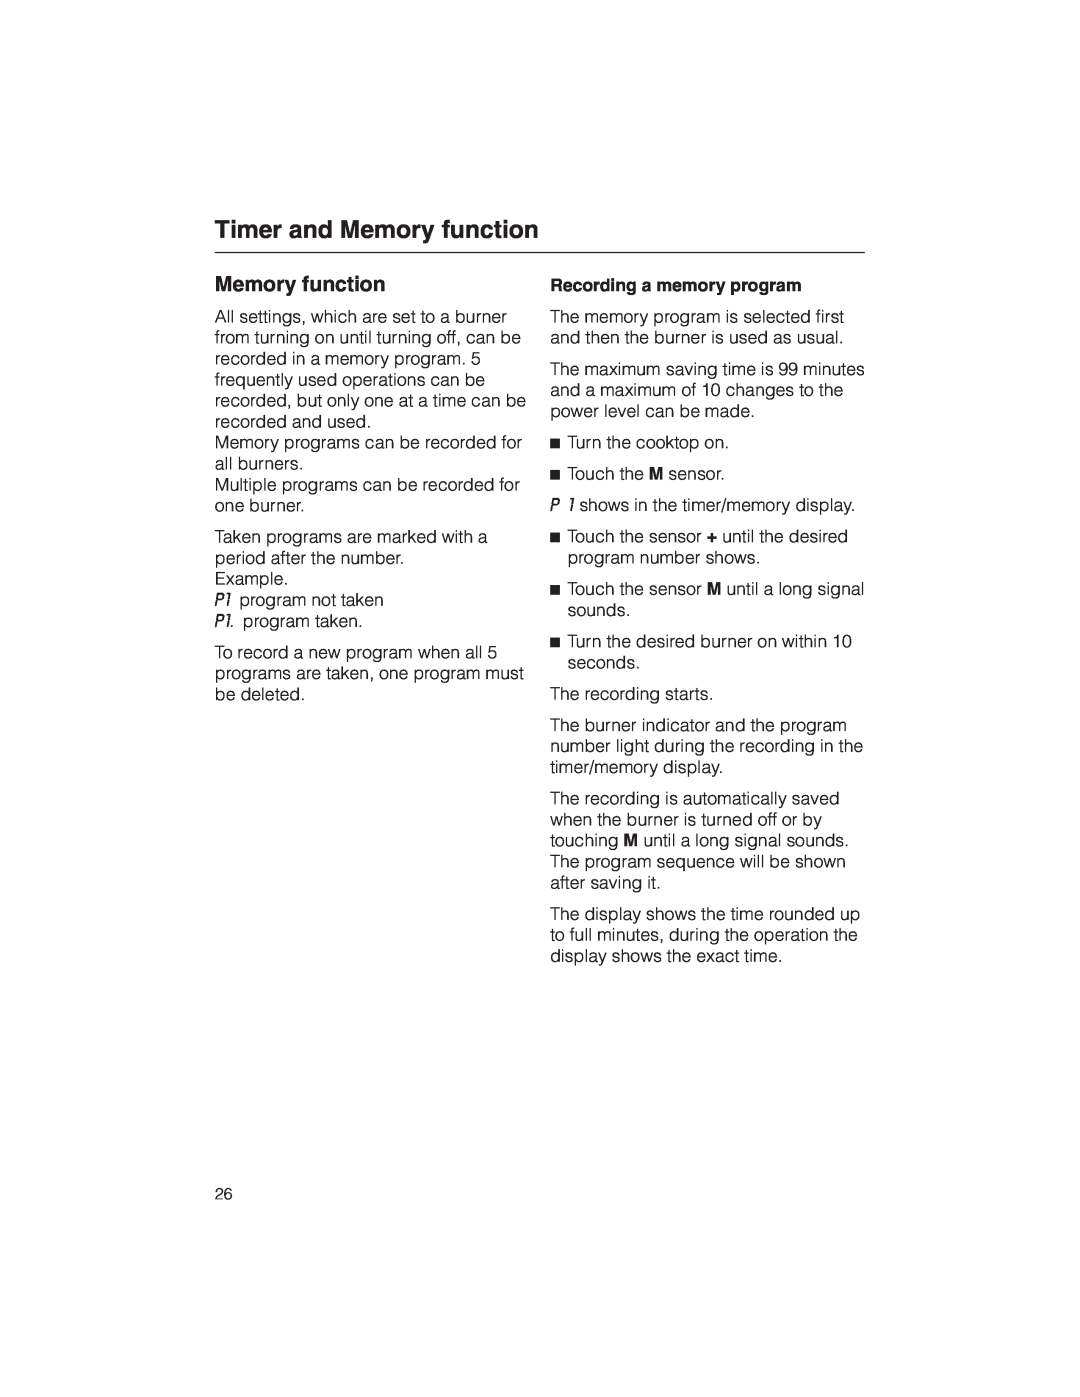 Miele KM 5773 installation instructions Recording a memory program, Timer and Memory function 